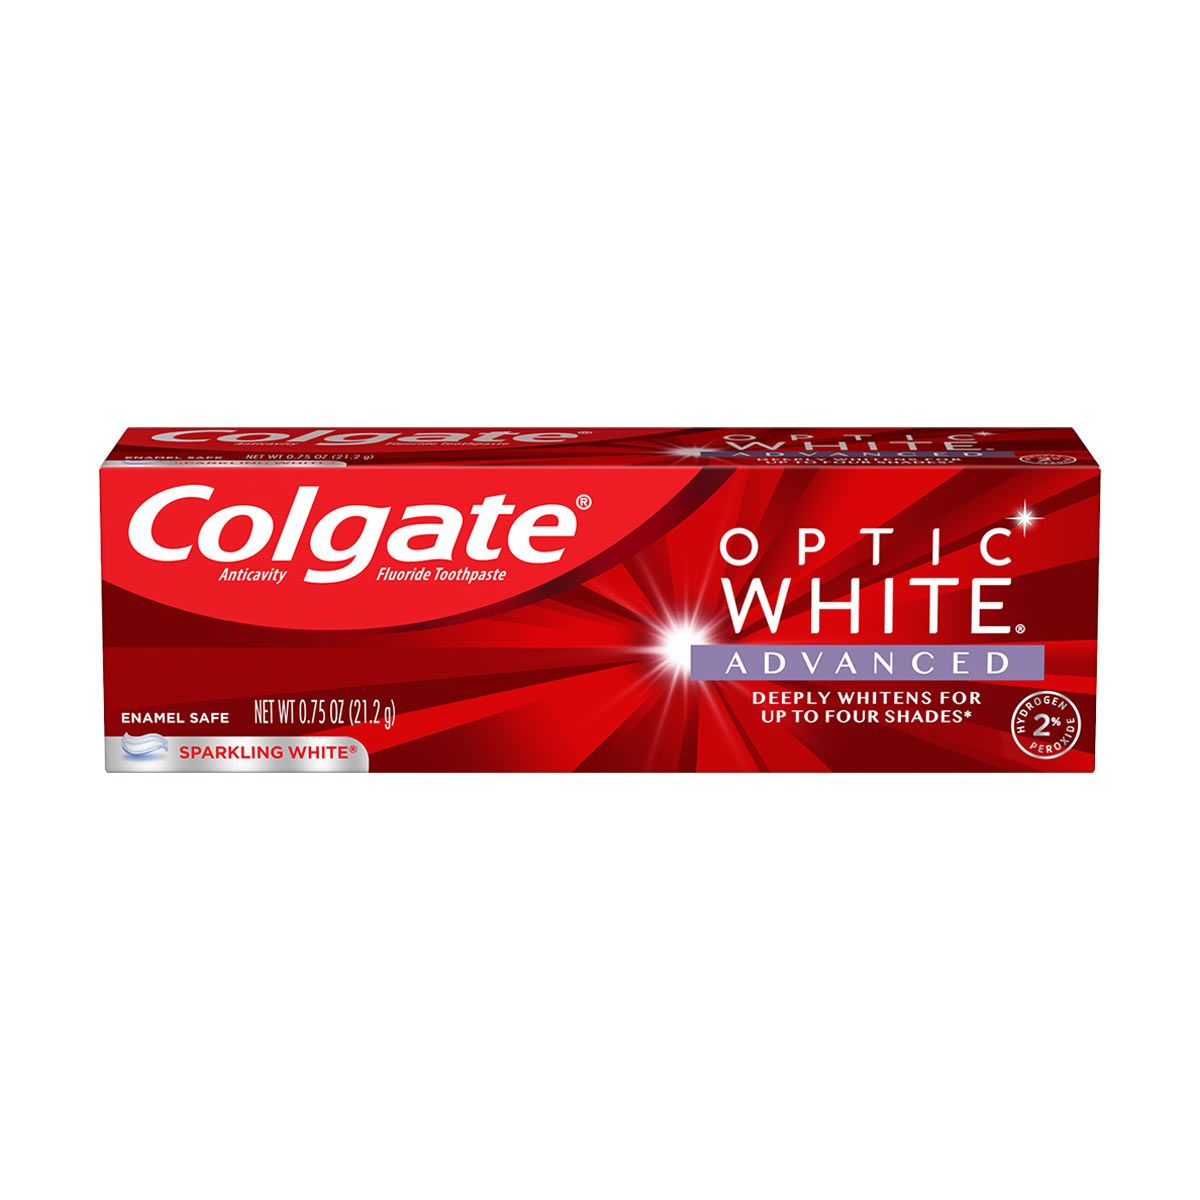 Colgate Optic White Advanced Teeth Whitening Toothpaste, Sparkling White - 0.75 ounce on Sale At Dollar General